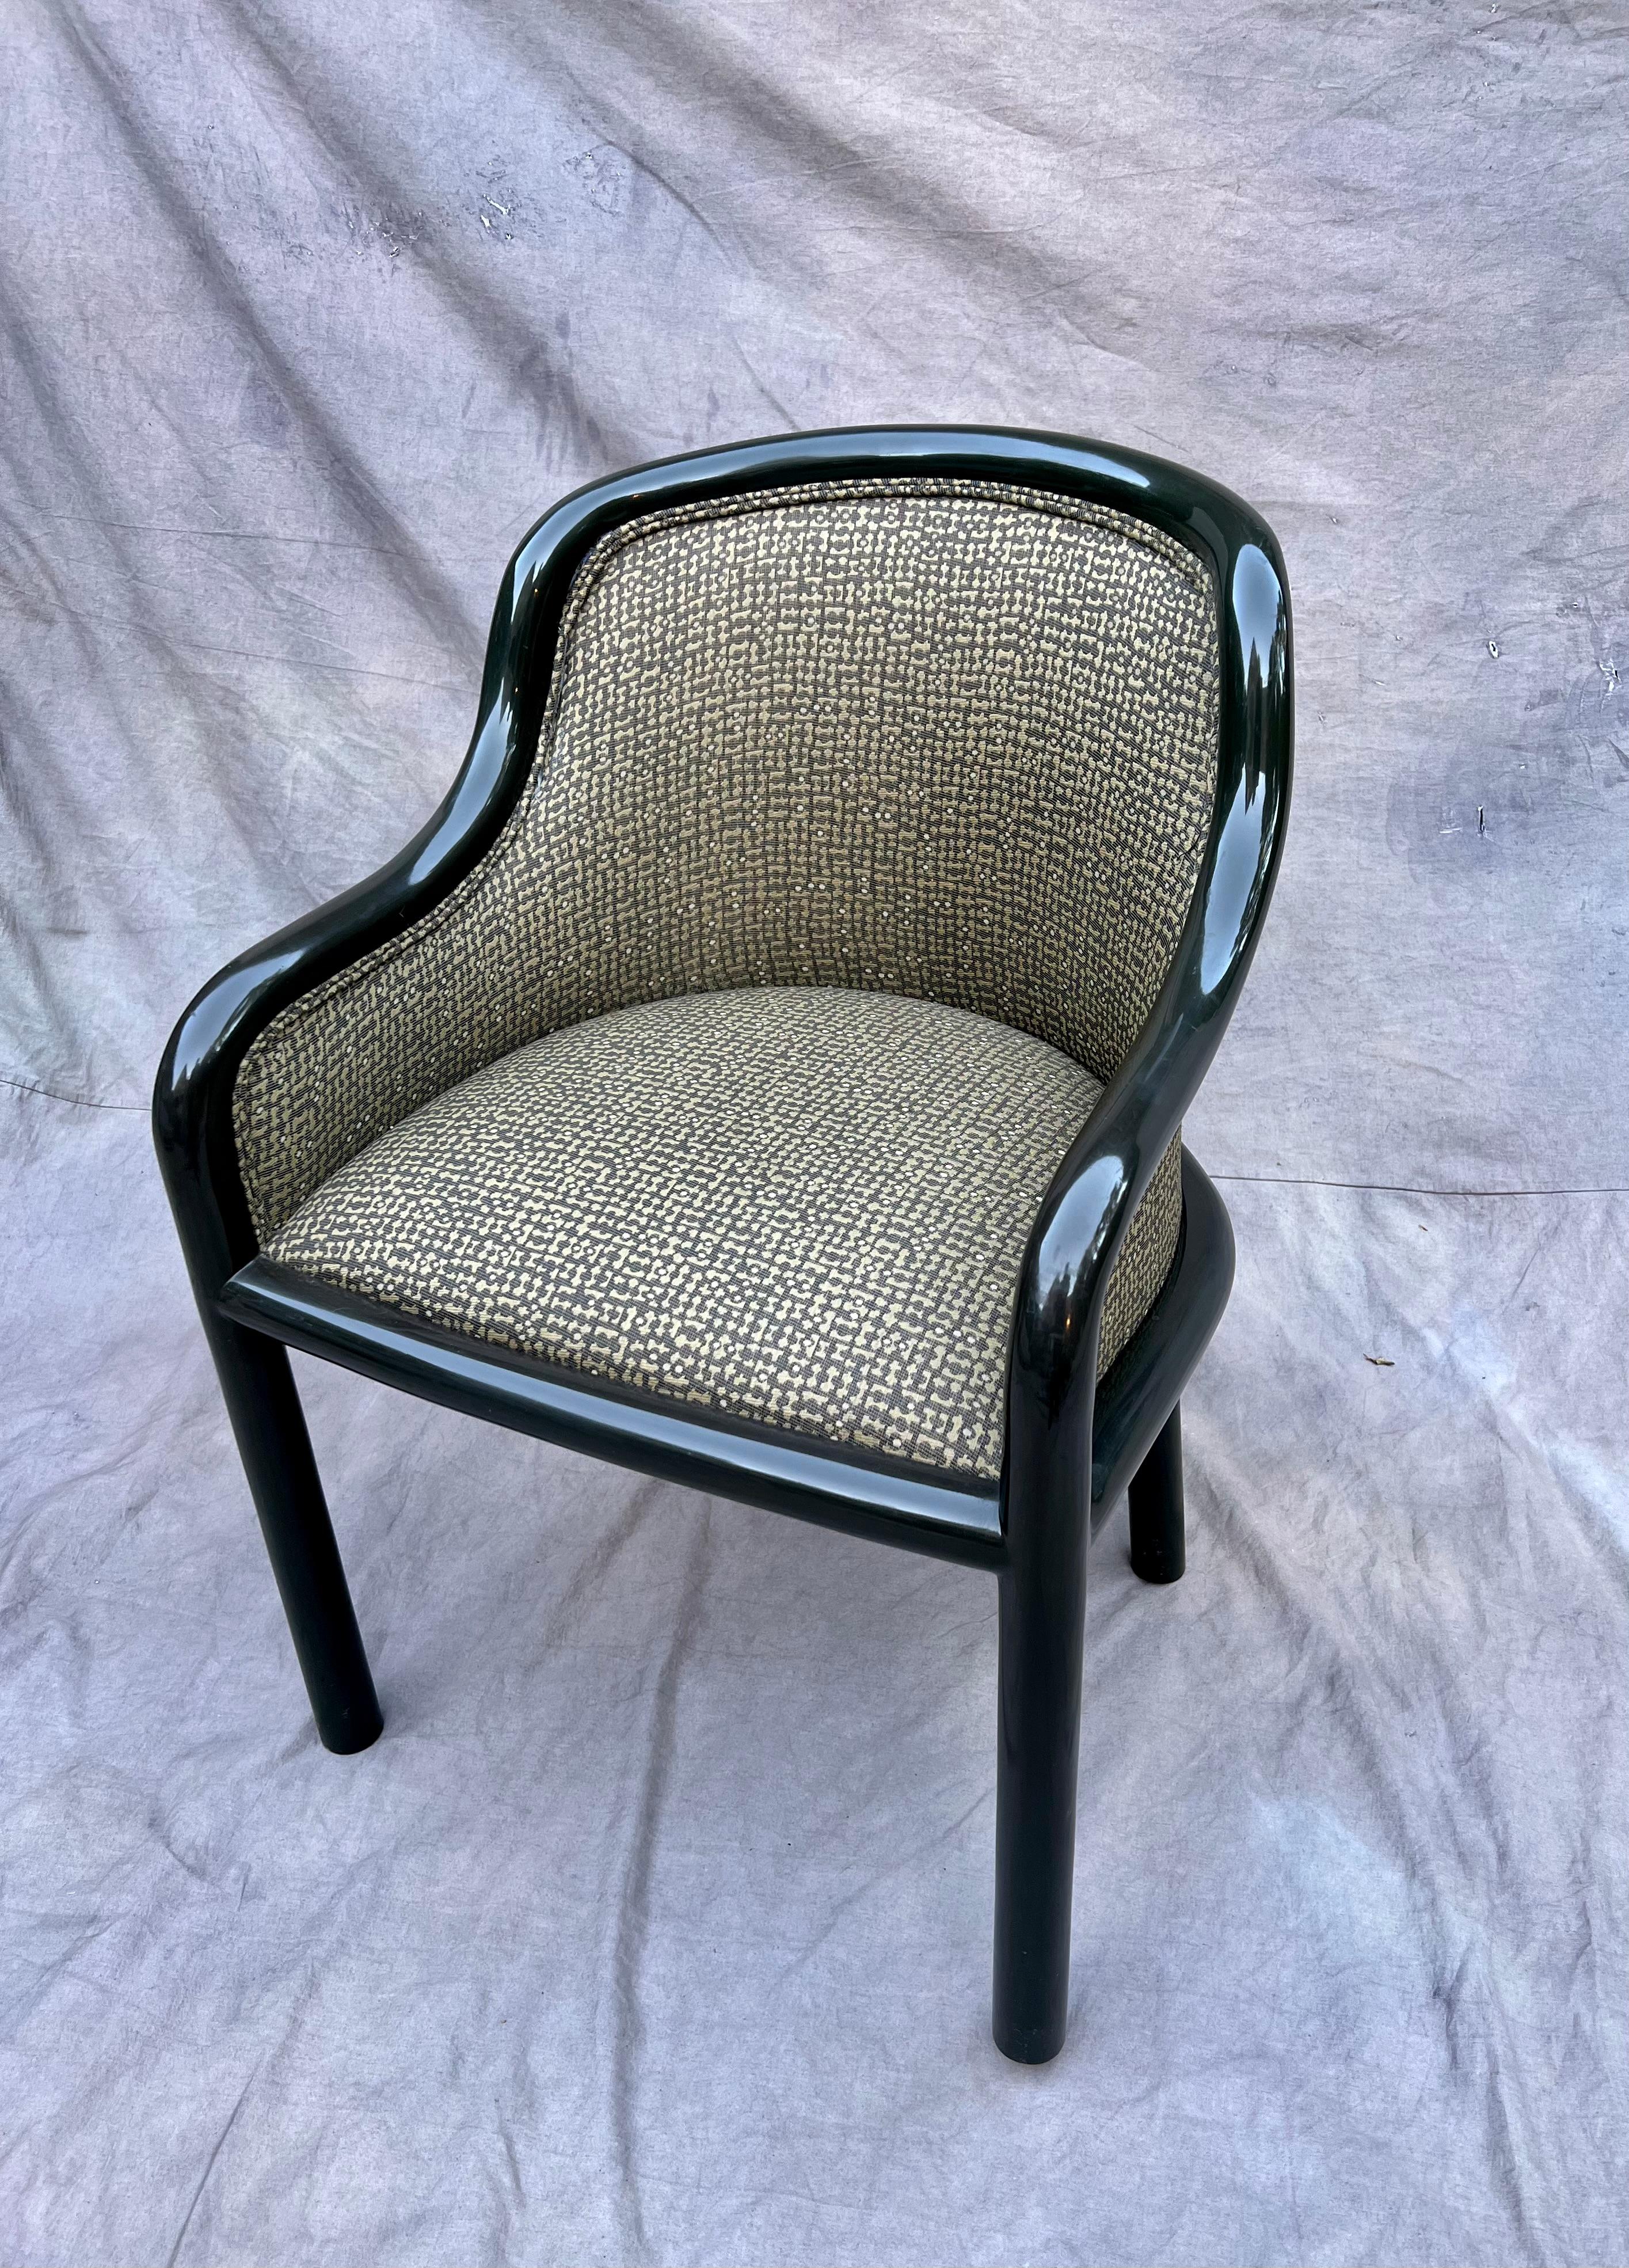 Signed. We have four lacquered chairs by Karl Springer, a compliment to any dining room area or game table. Color is a unique mix of green and gray and upholstery is in good condition. These are rare and hard to find.